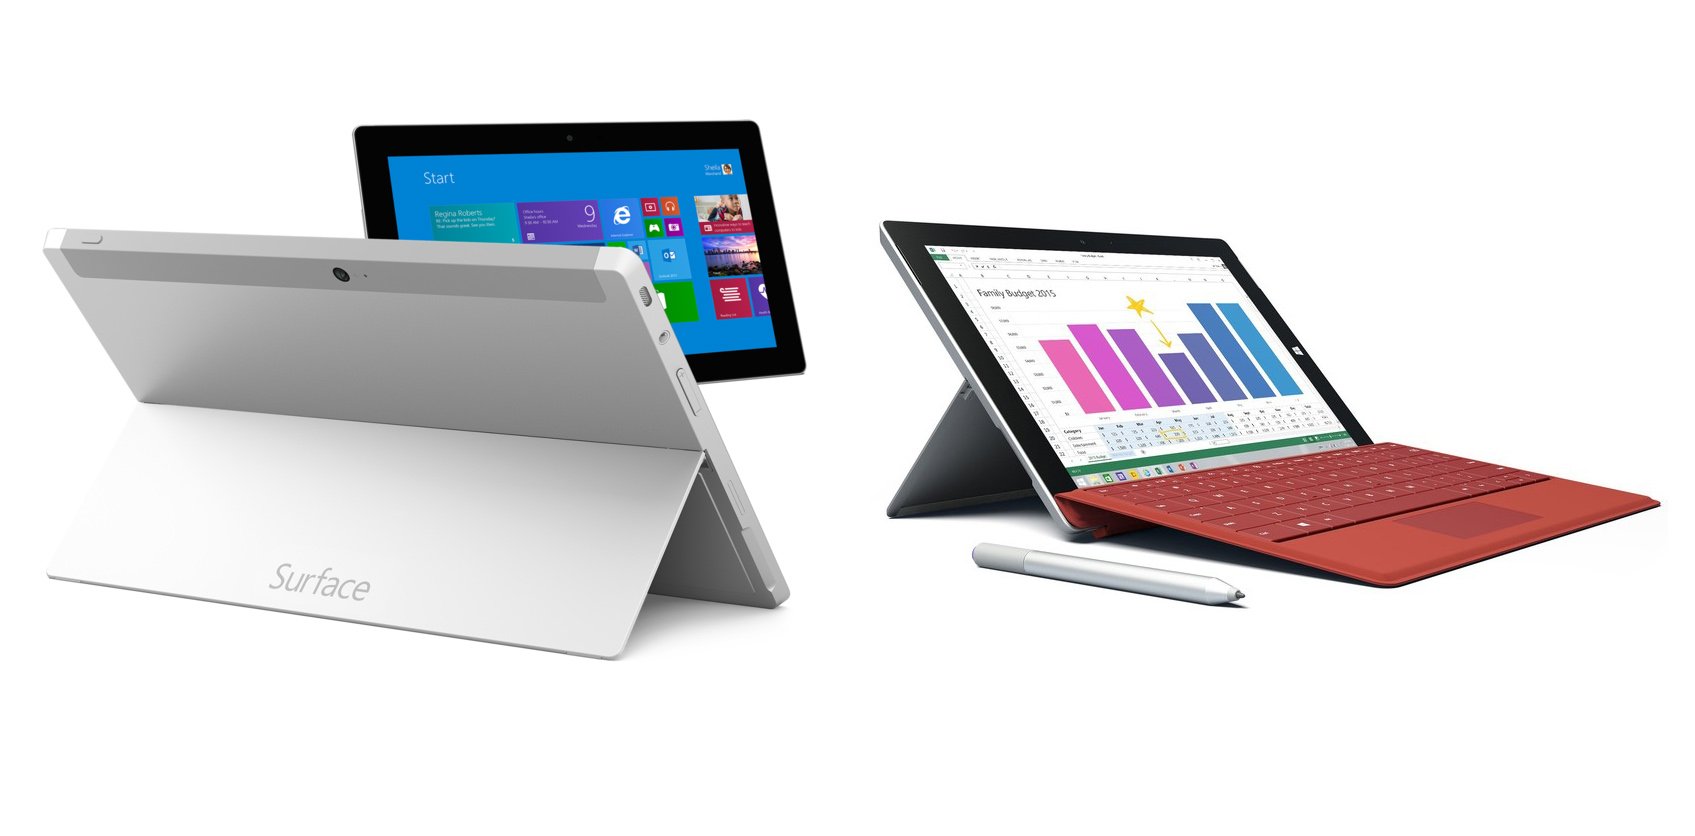 Surface 2 vs Surface 3